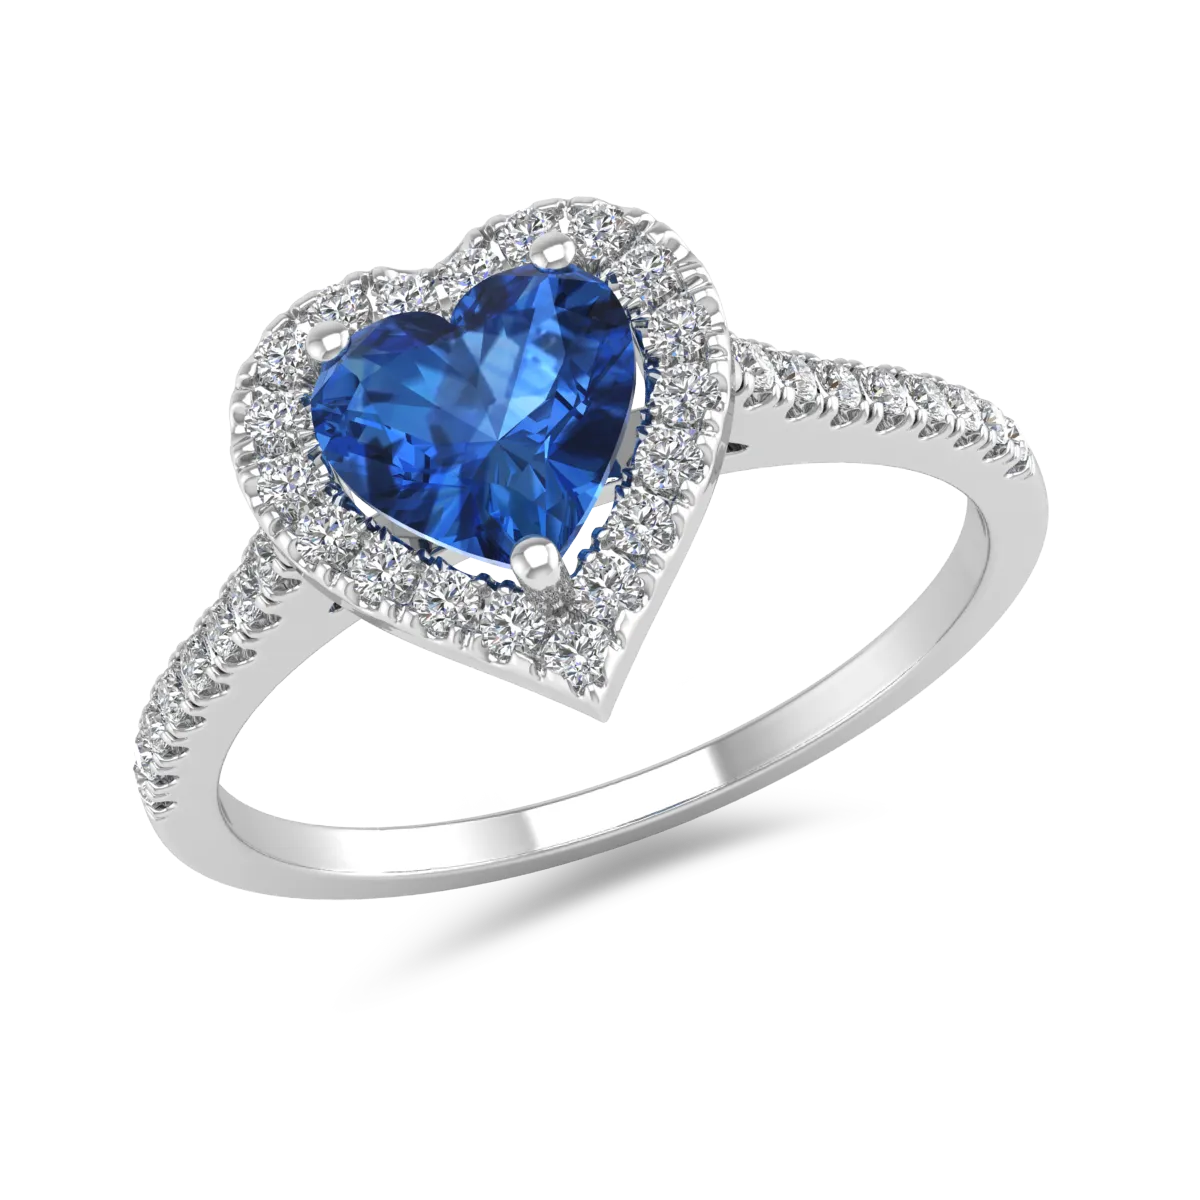 18K white gold engagement ring with 0.76ct sapphire and 0.26ct diamonds